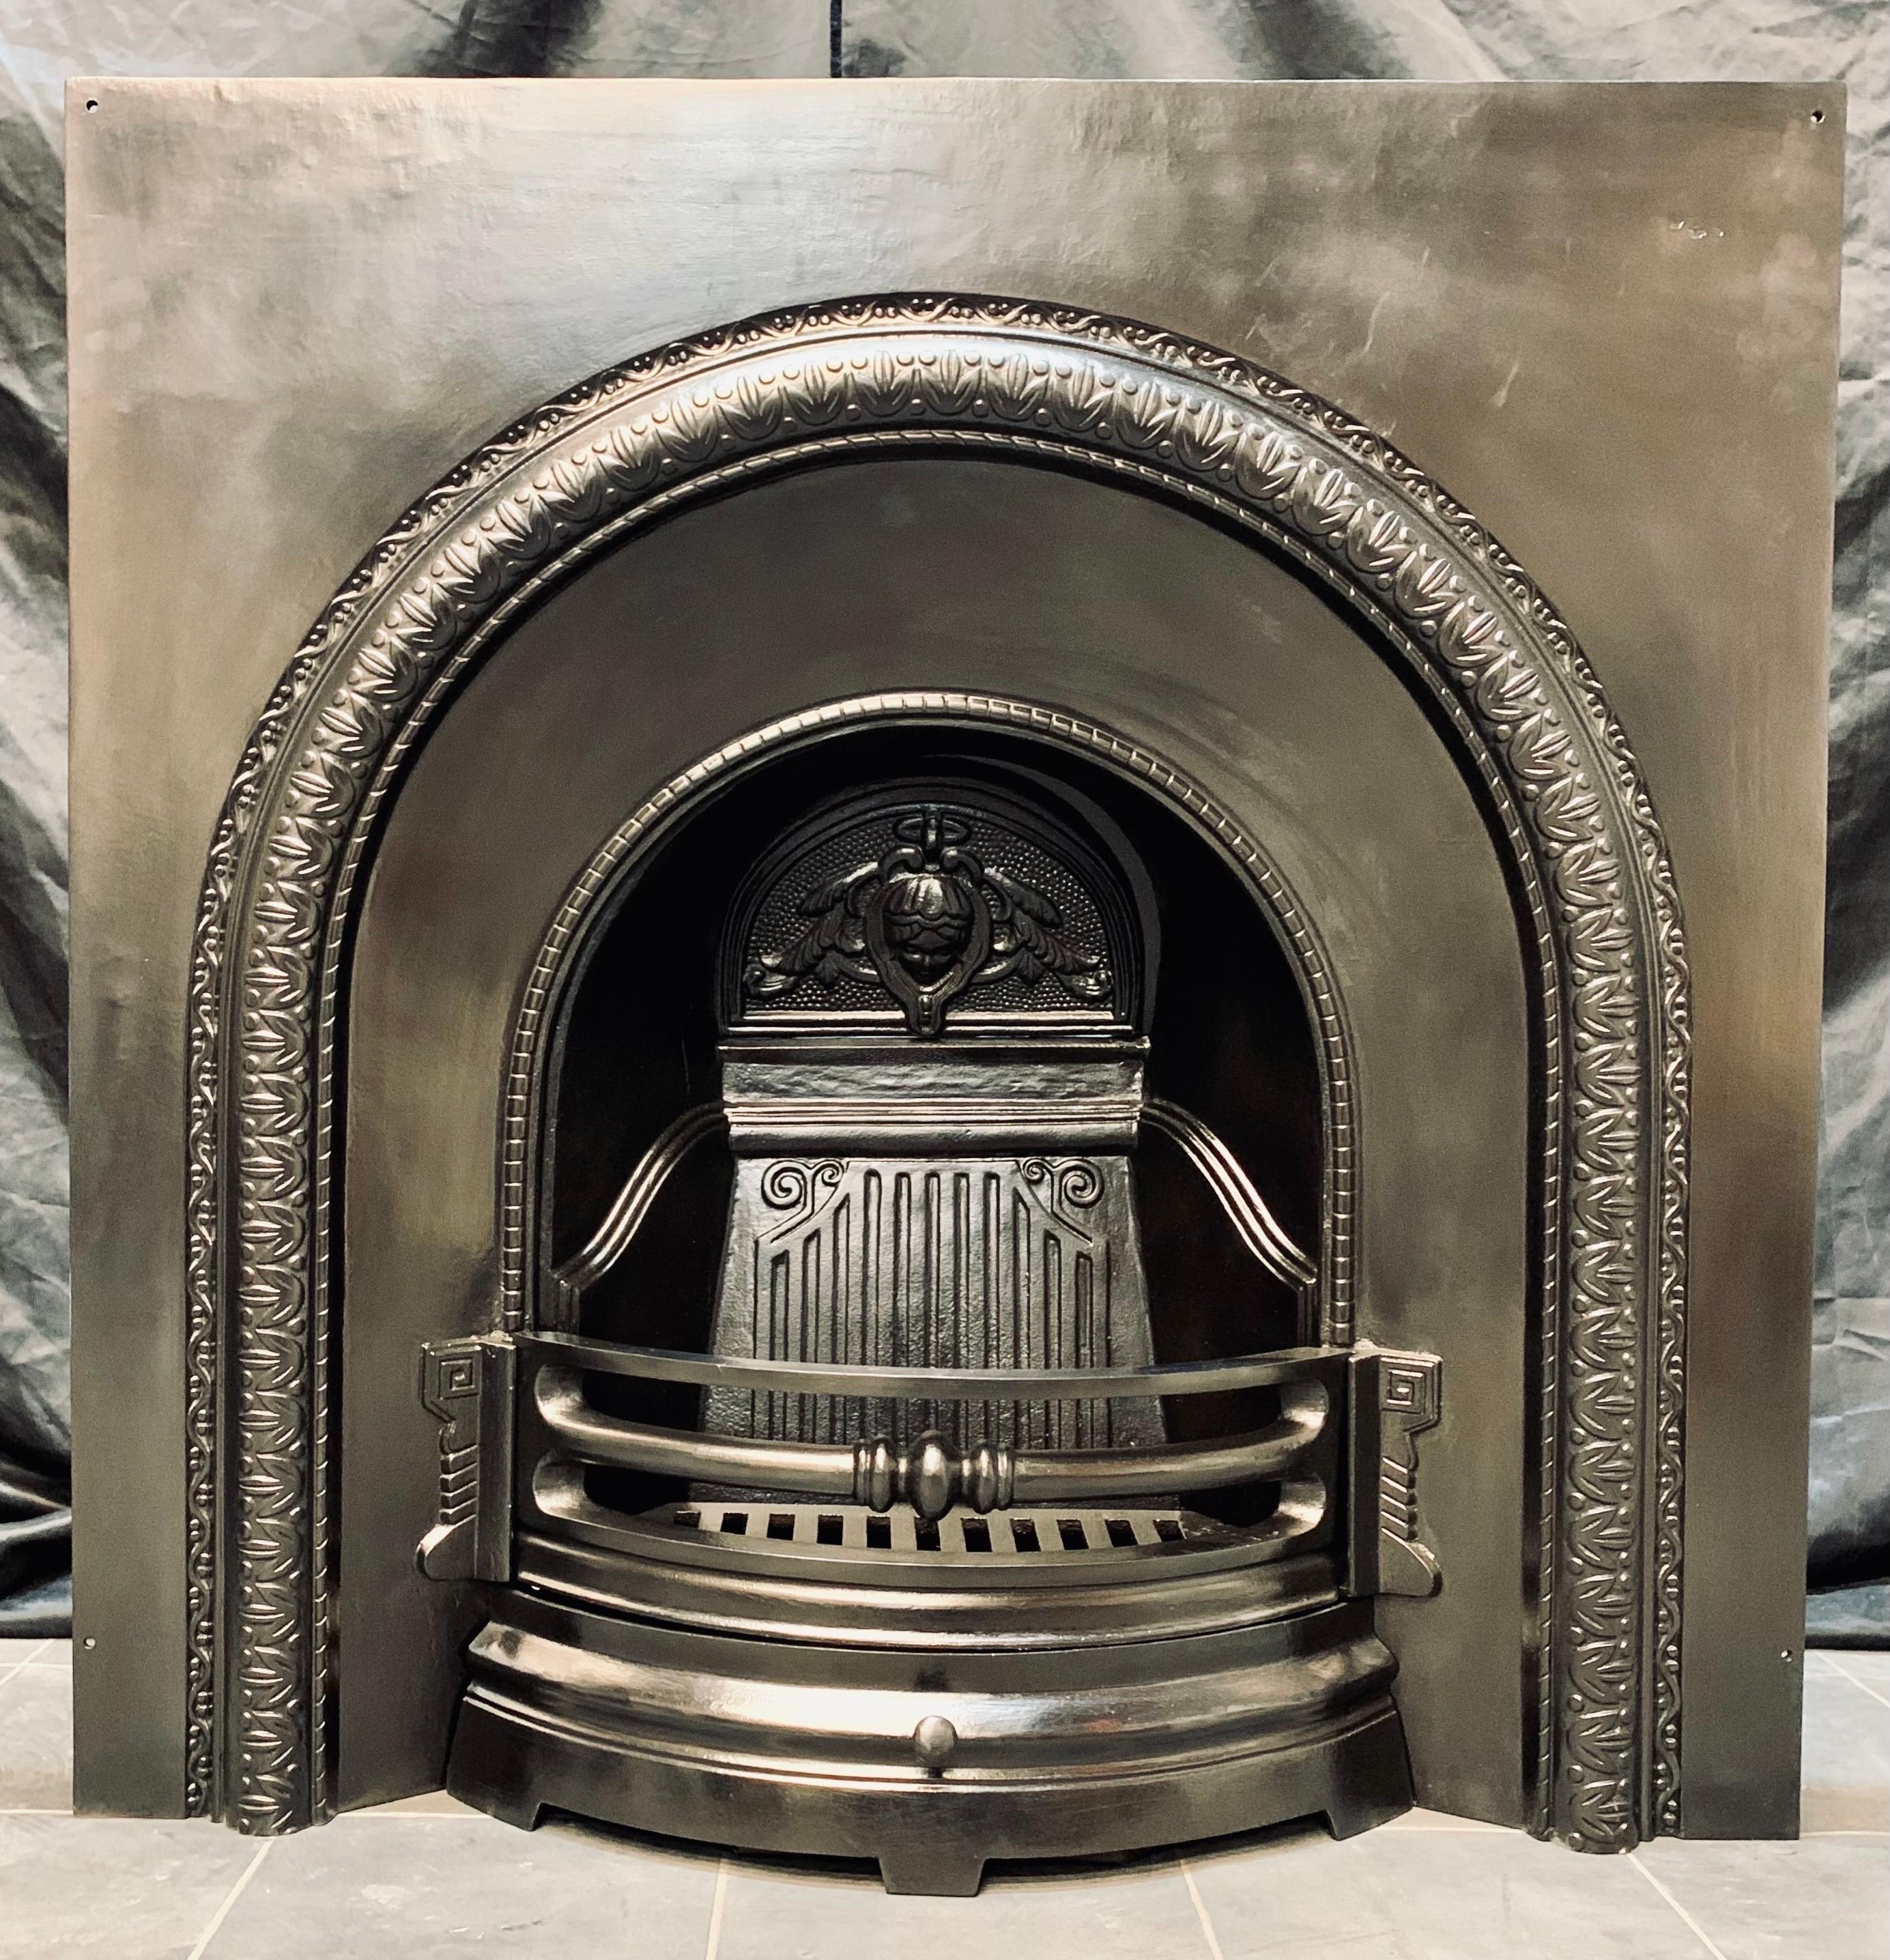 A pleasing 19th century Victorian manner cast iron fireplace insert. A generous outer plate with a raised border, the three barred curved fire front with ash pan door below. Movable damper to the inside, comes with a shaped ash pan.